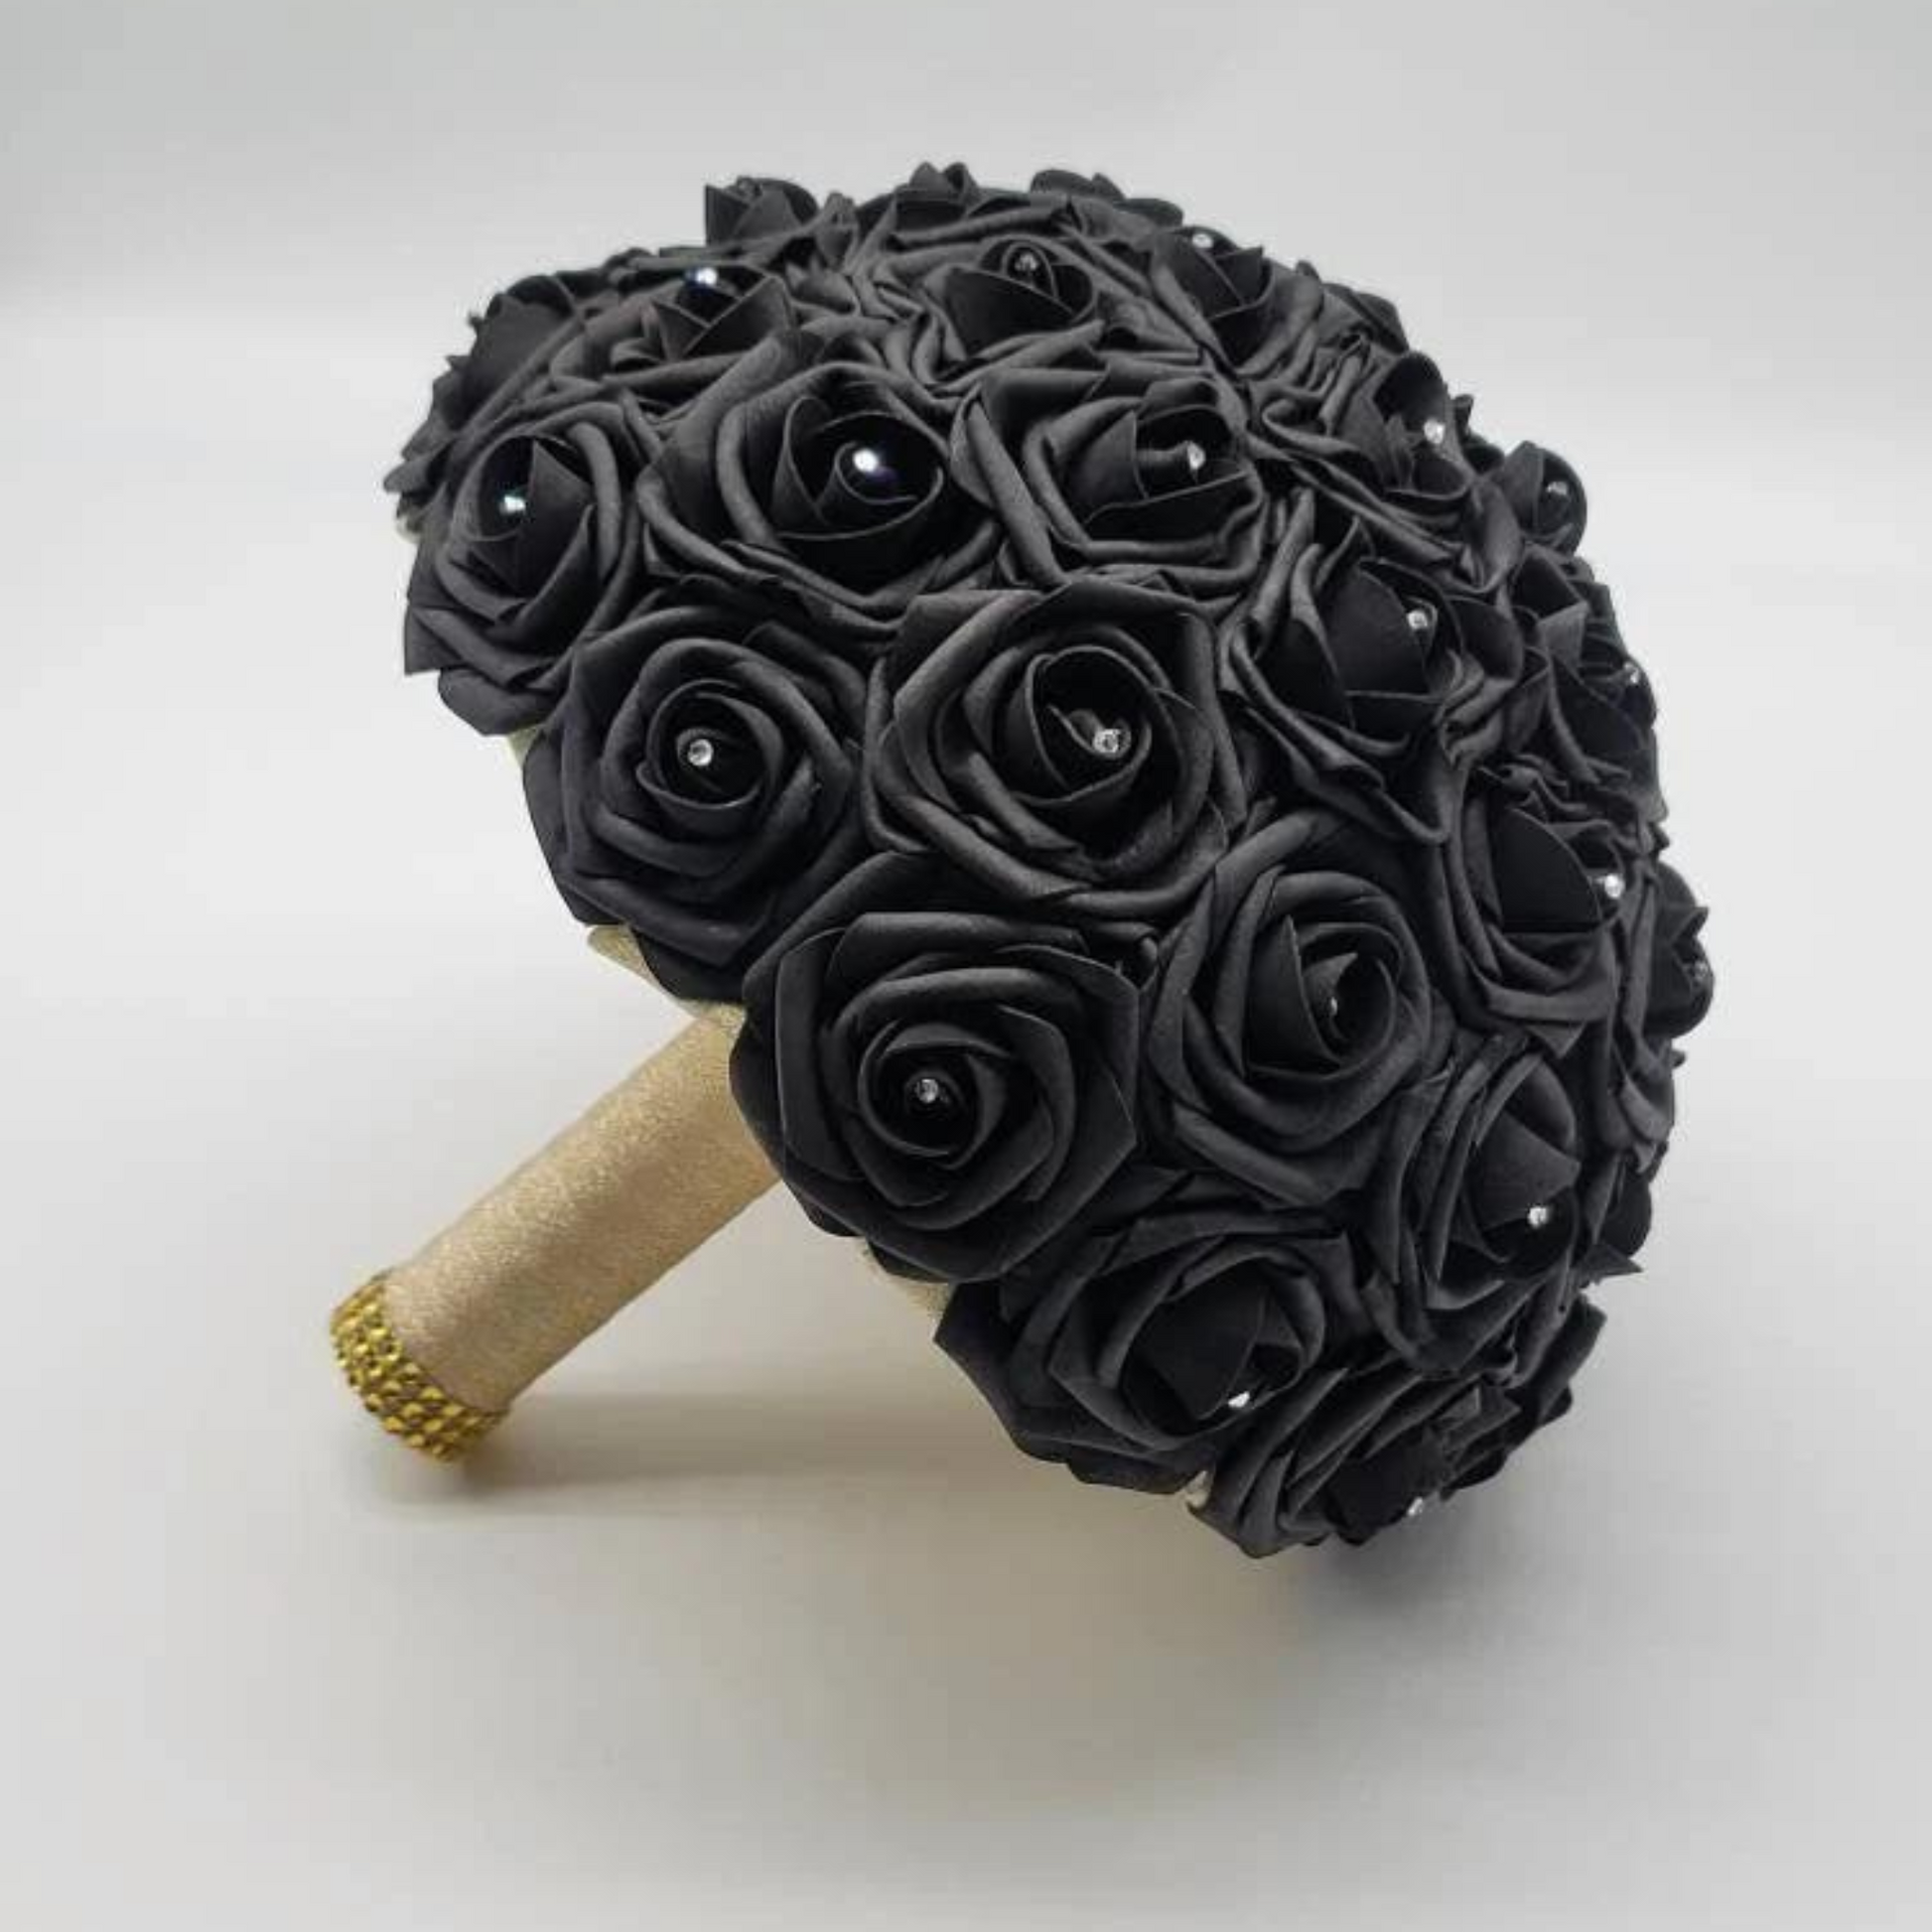 black bridal bouquet made with real touch roses and gold ribbon handle. gold bling wrap handle